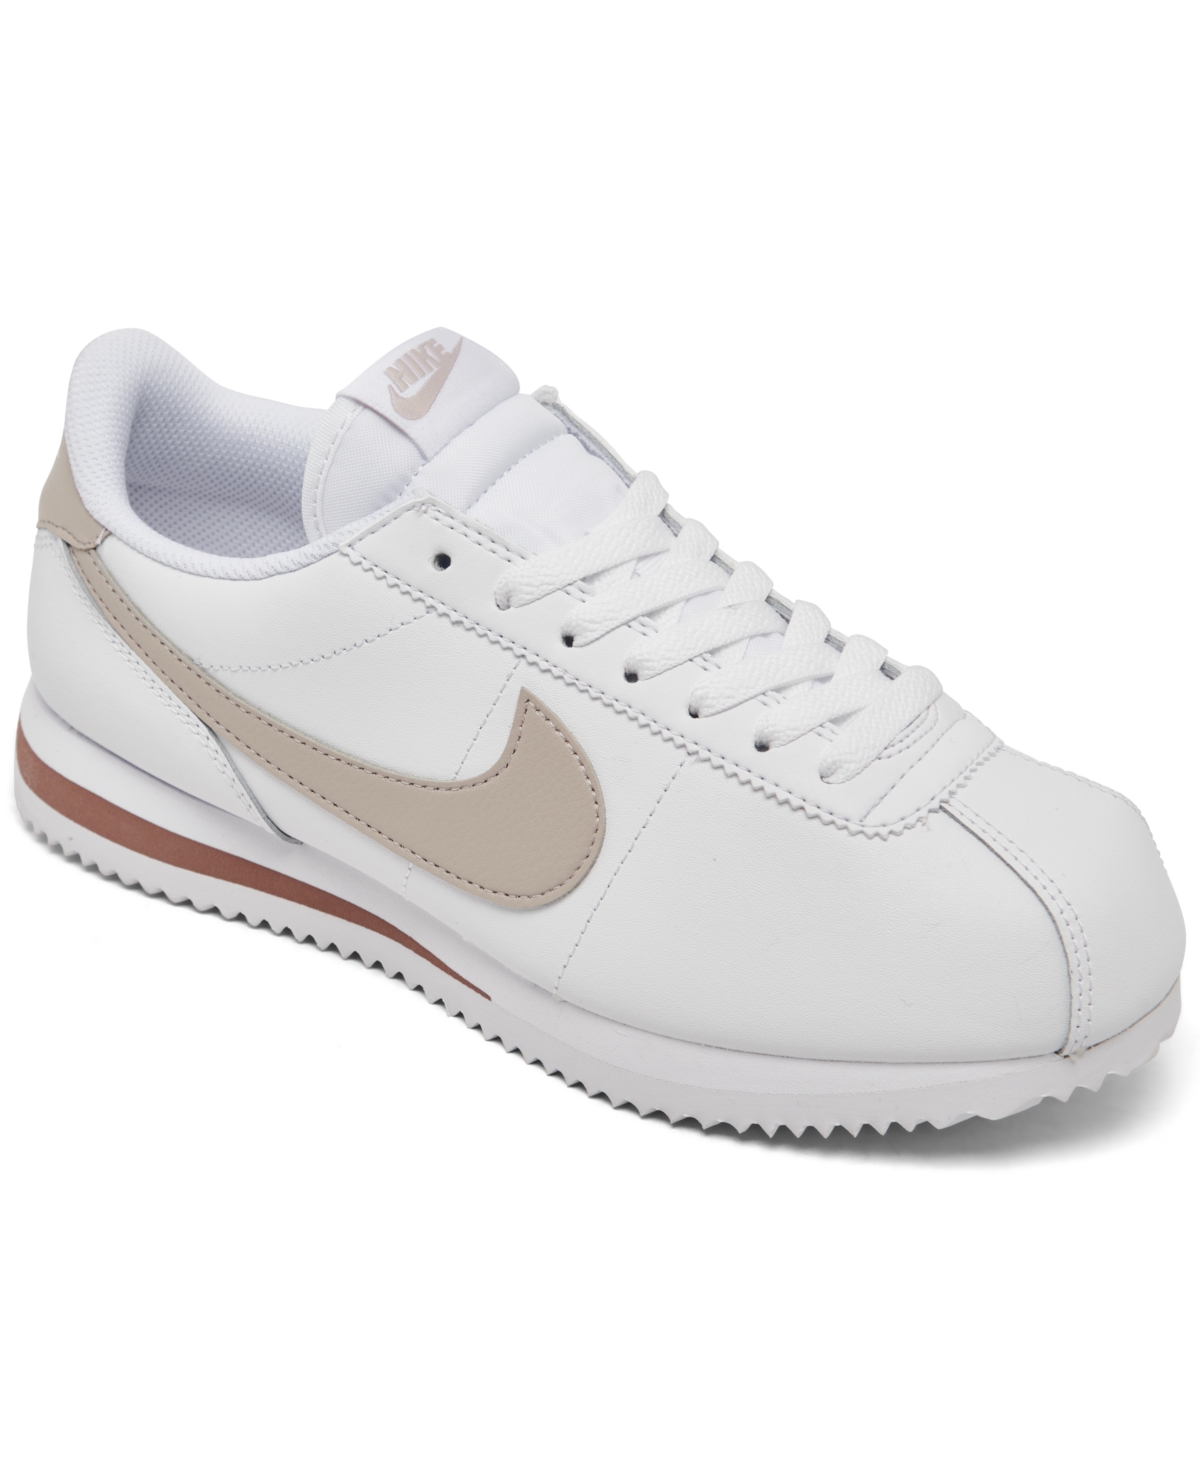 Women's Classic Cortez Leather Casual Sneakers from Finish Line - White, Platinum